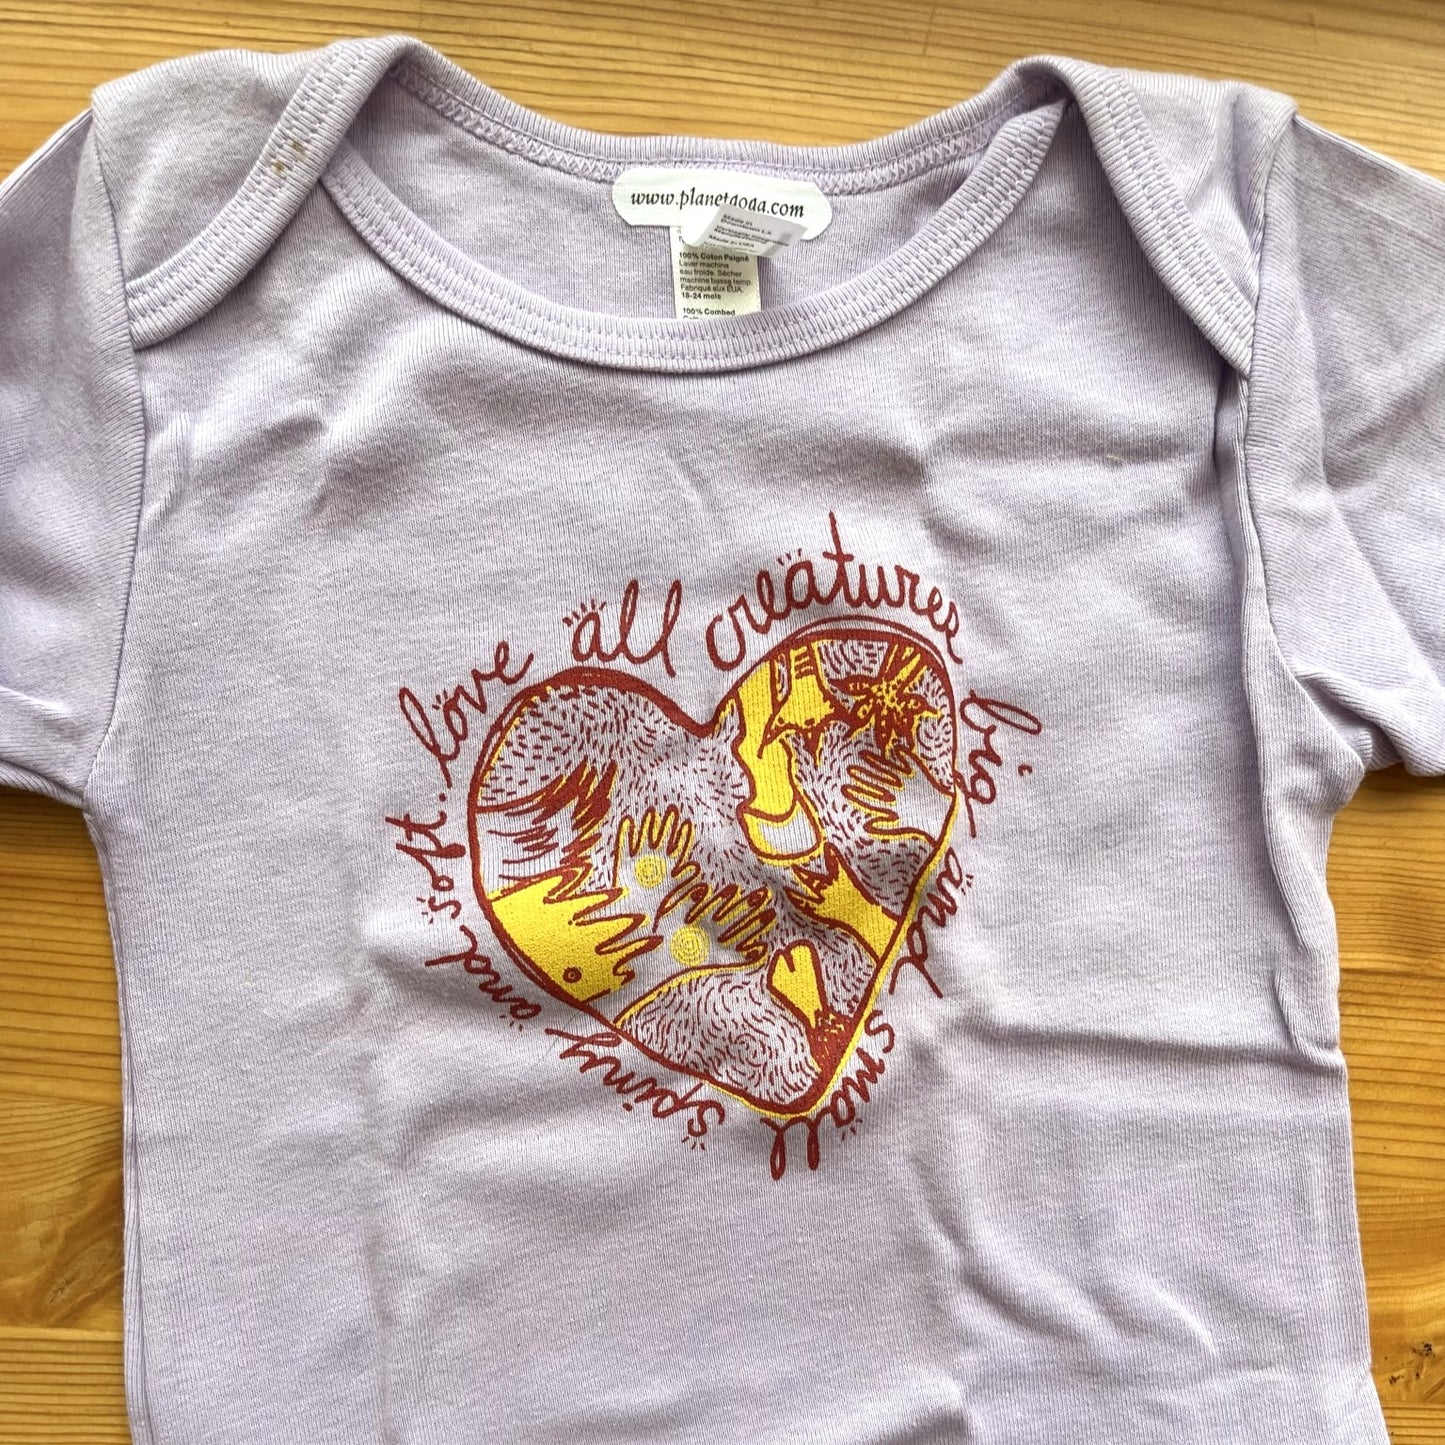 Toddler T-Shirt - Love all Creatures